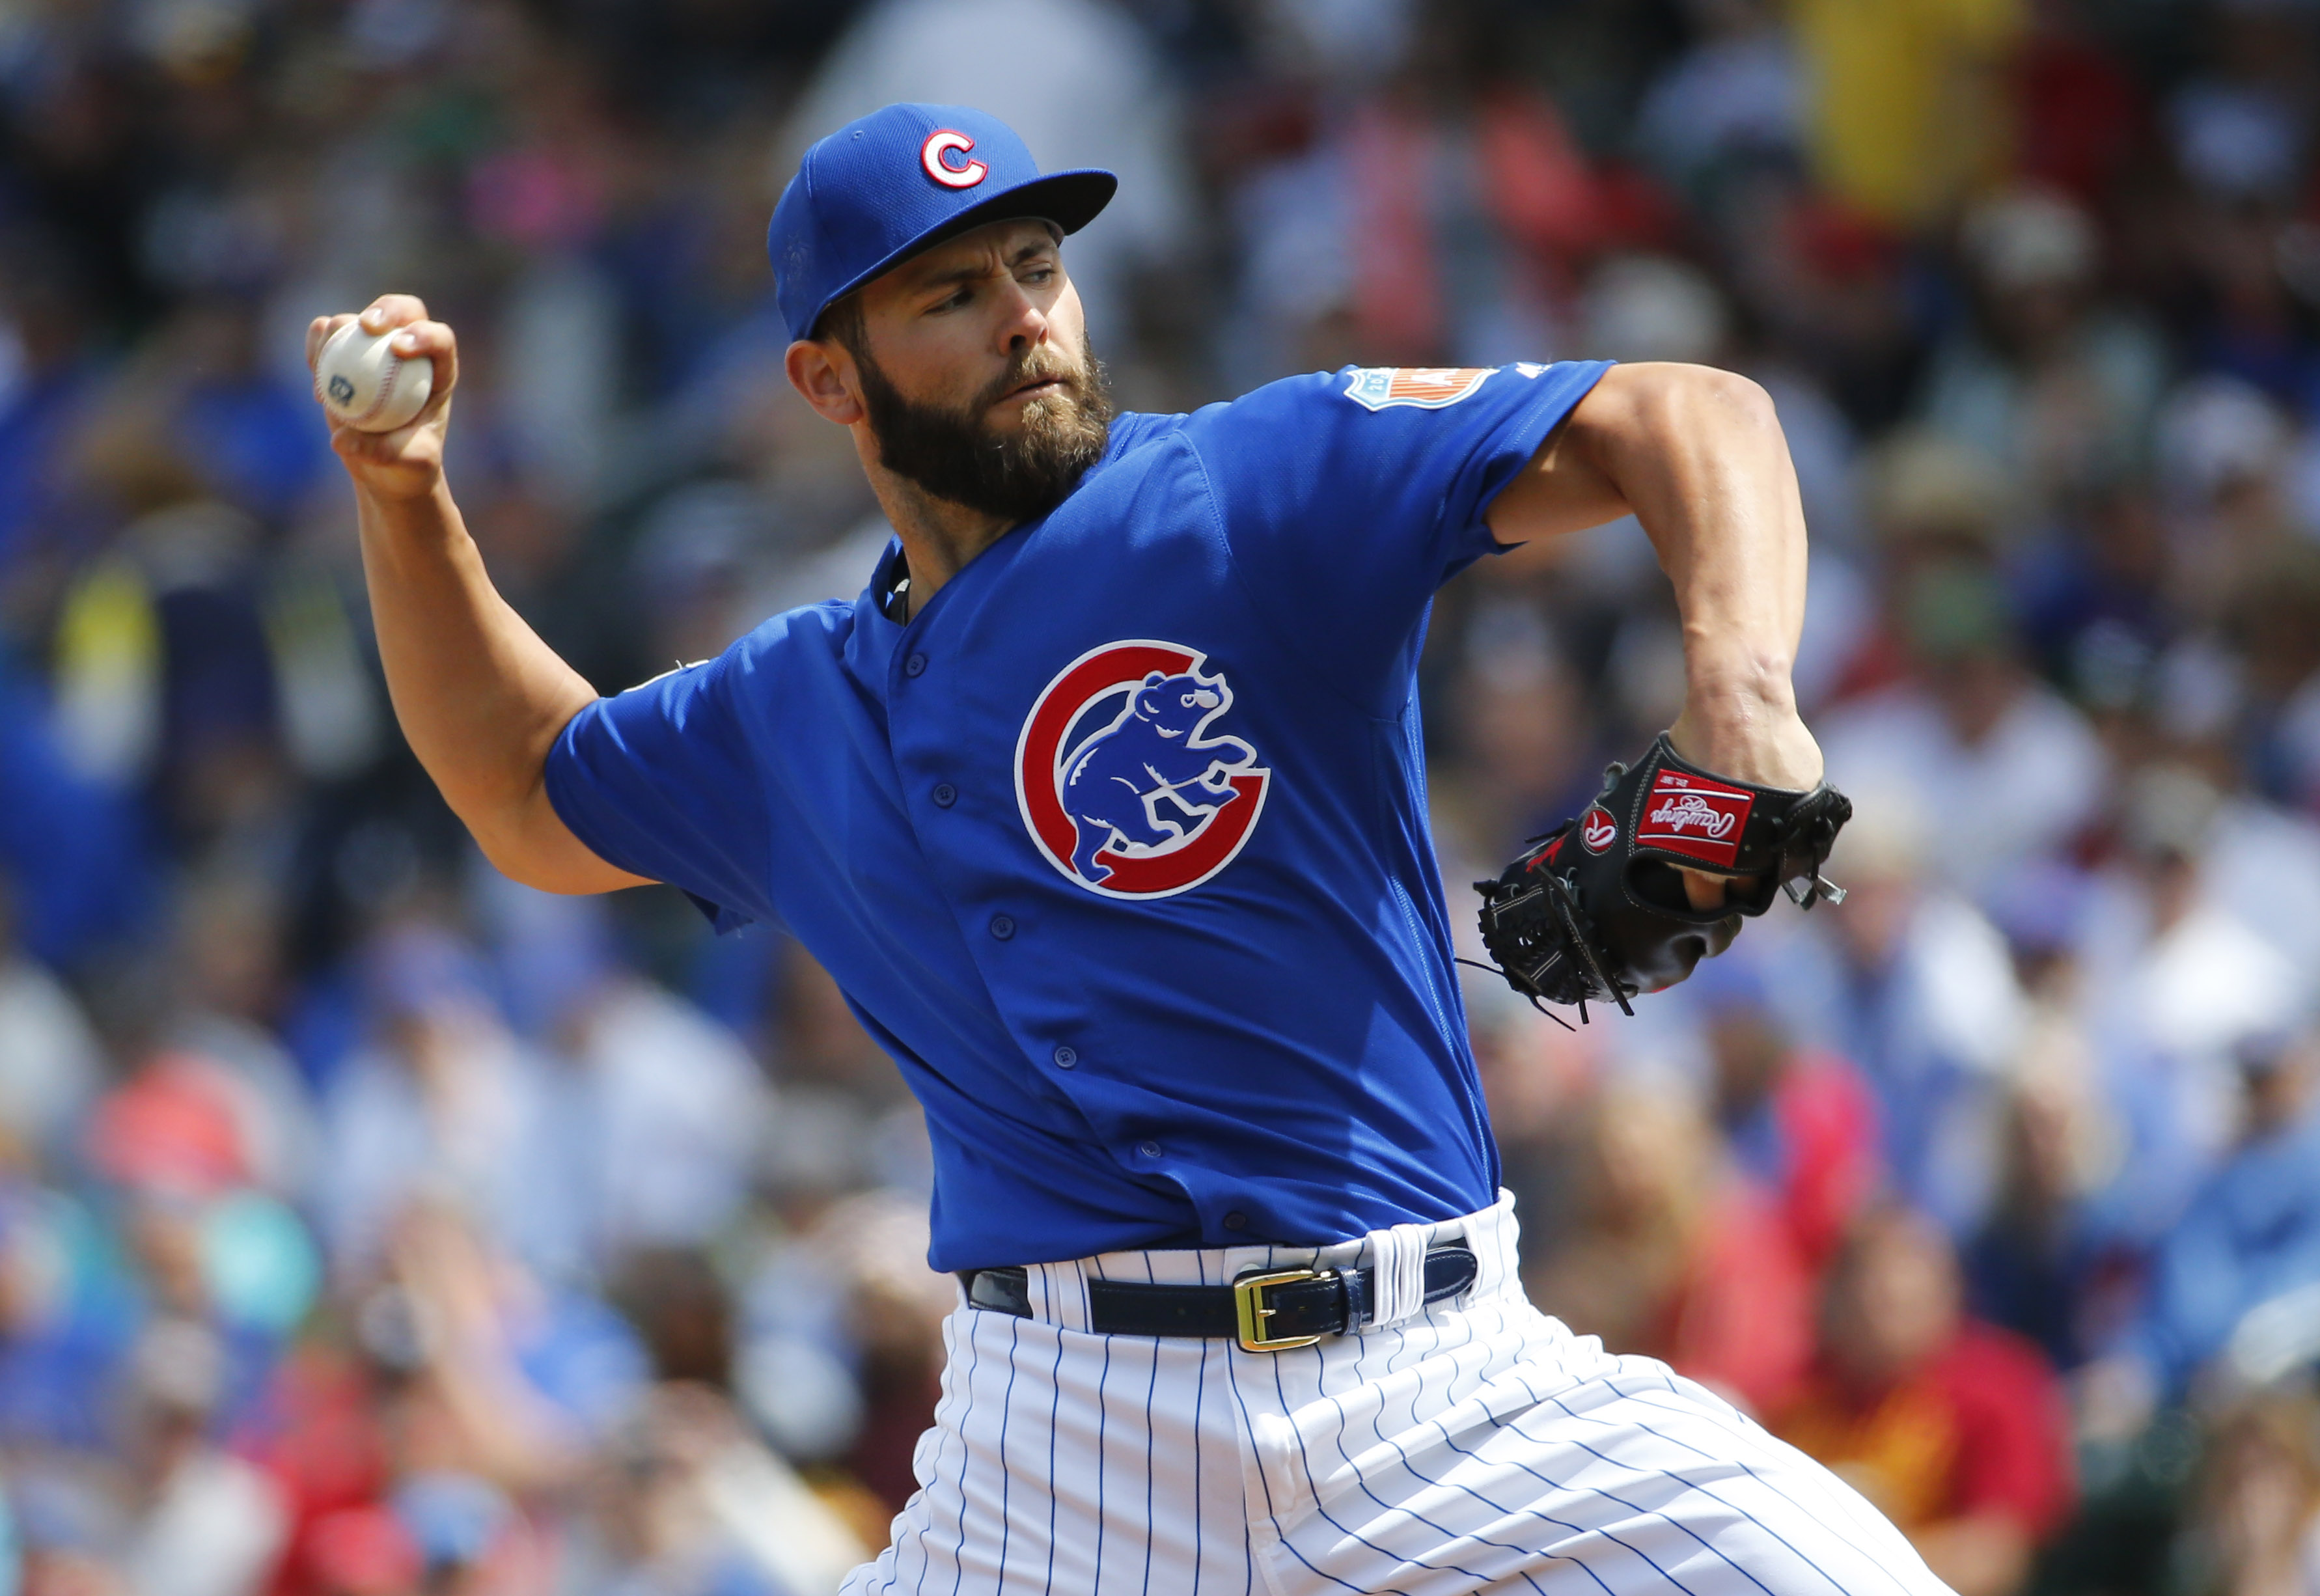 Cubs' Jake Arrieta Throws Second Career No-Hitter - The New York Times